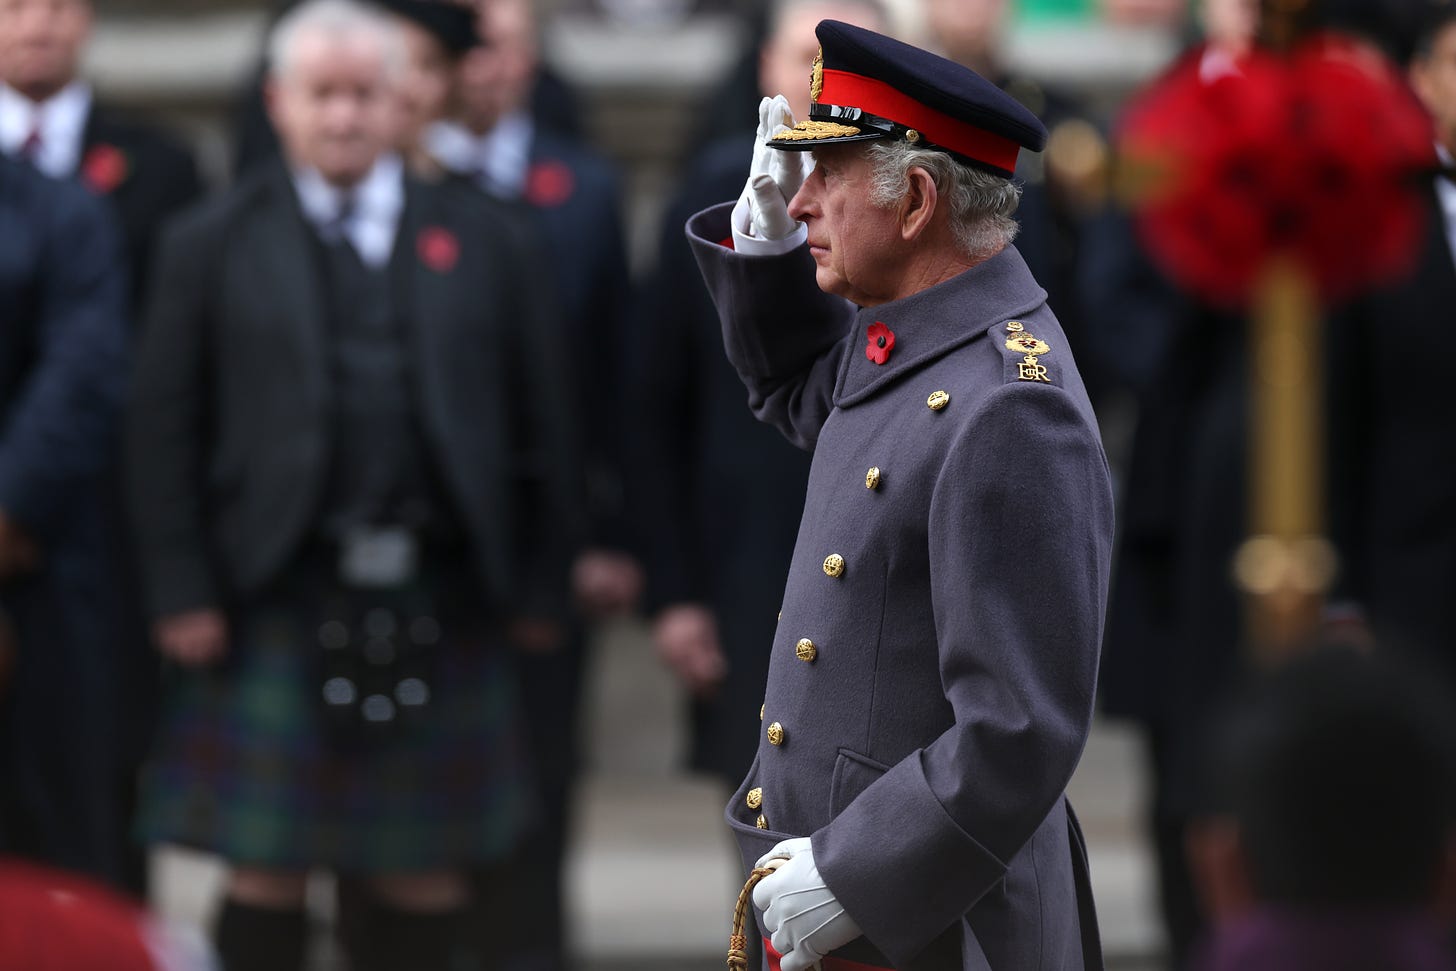 King Charles wearing military uniform and saluting